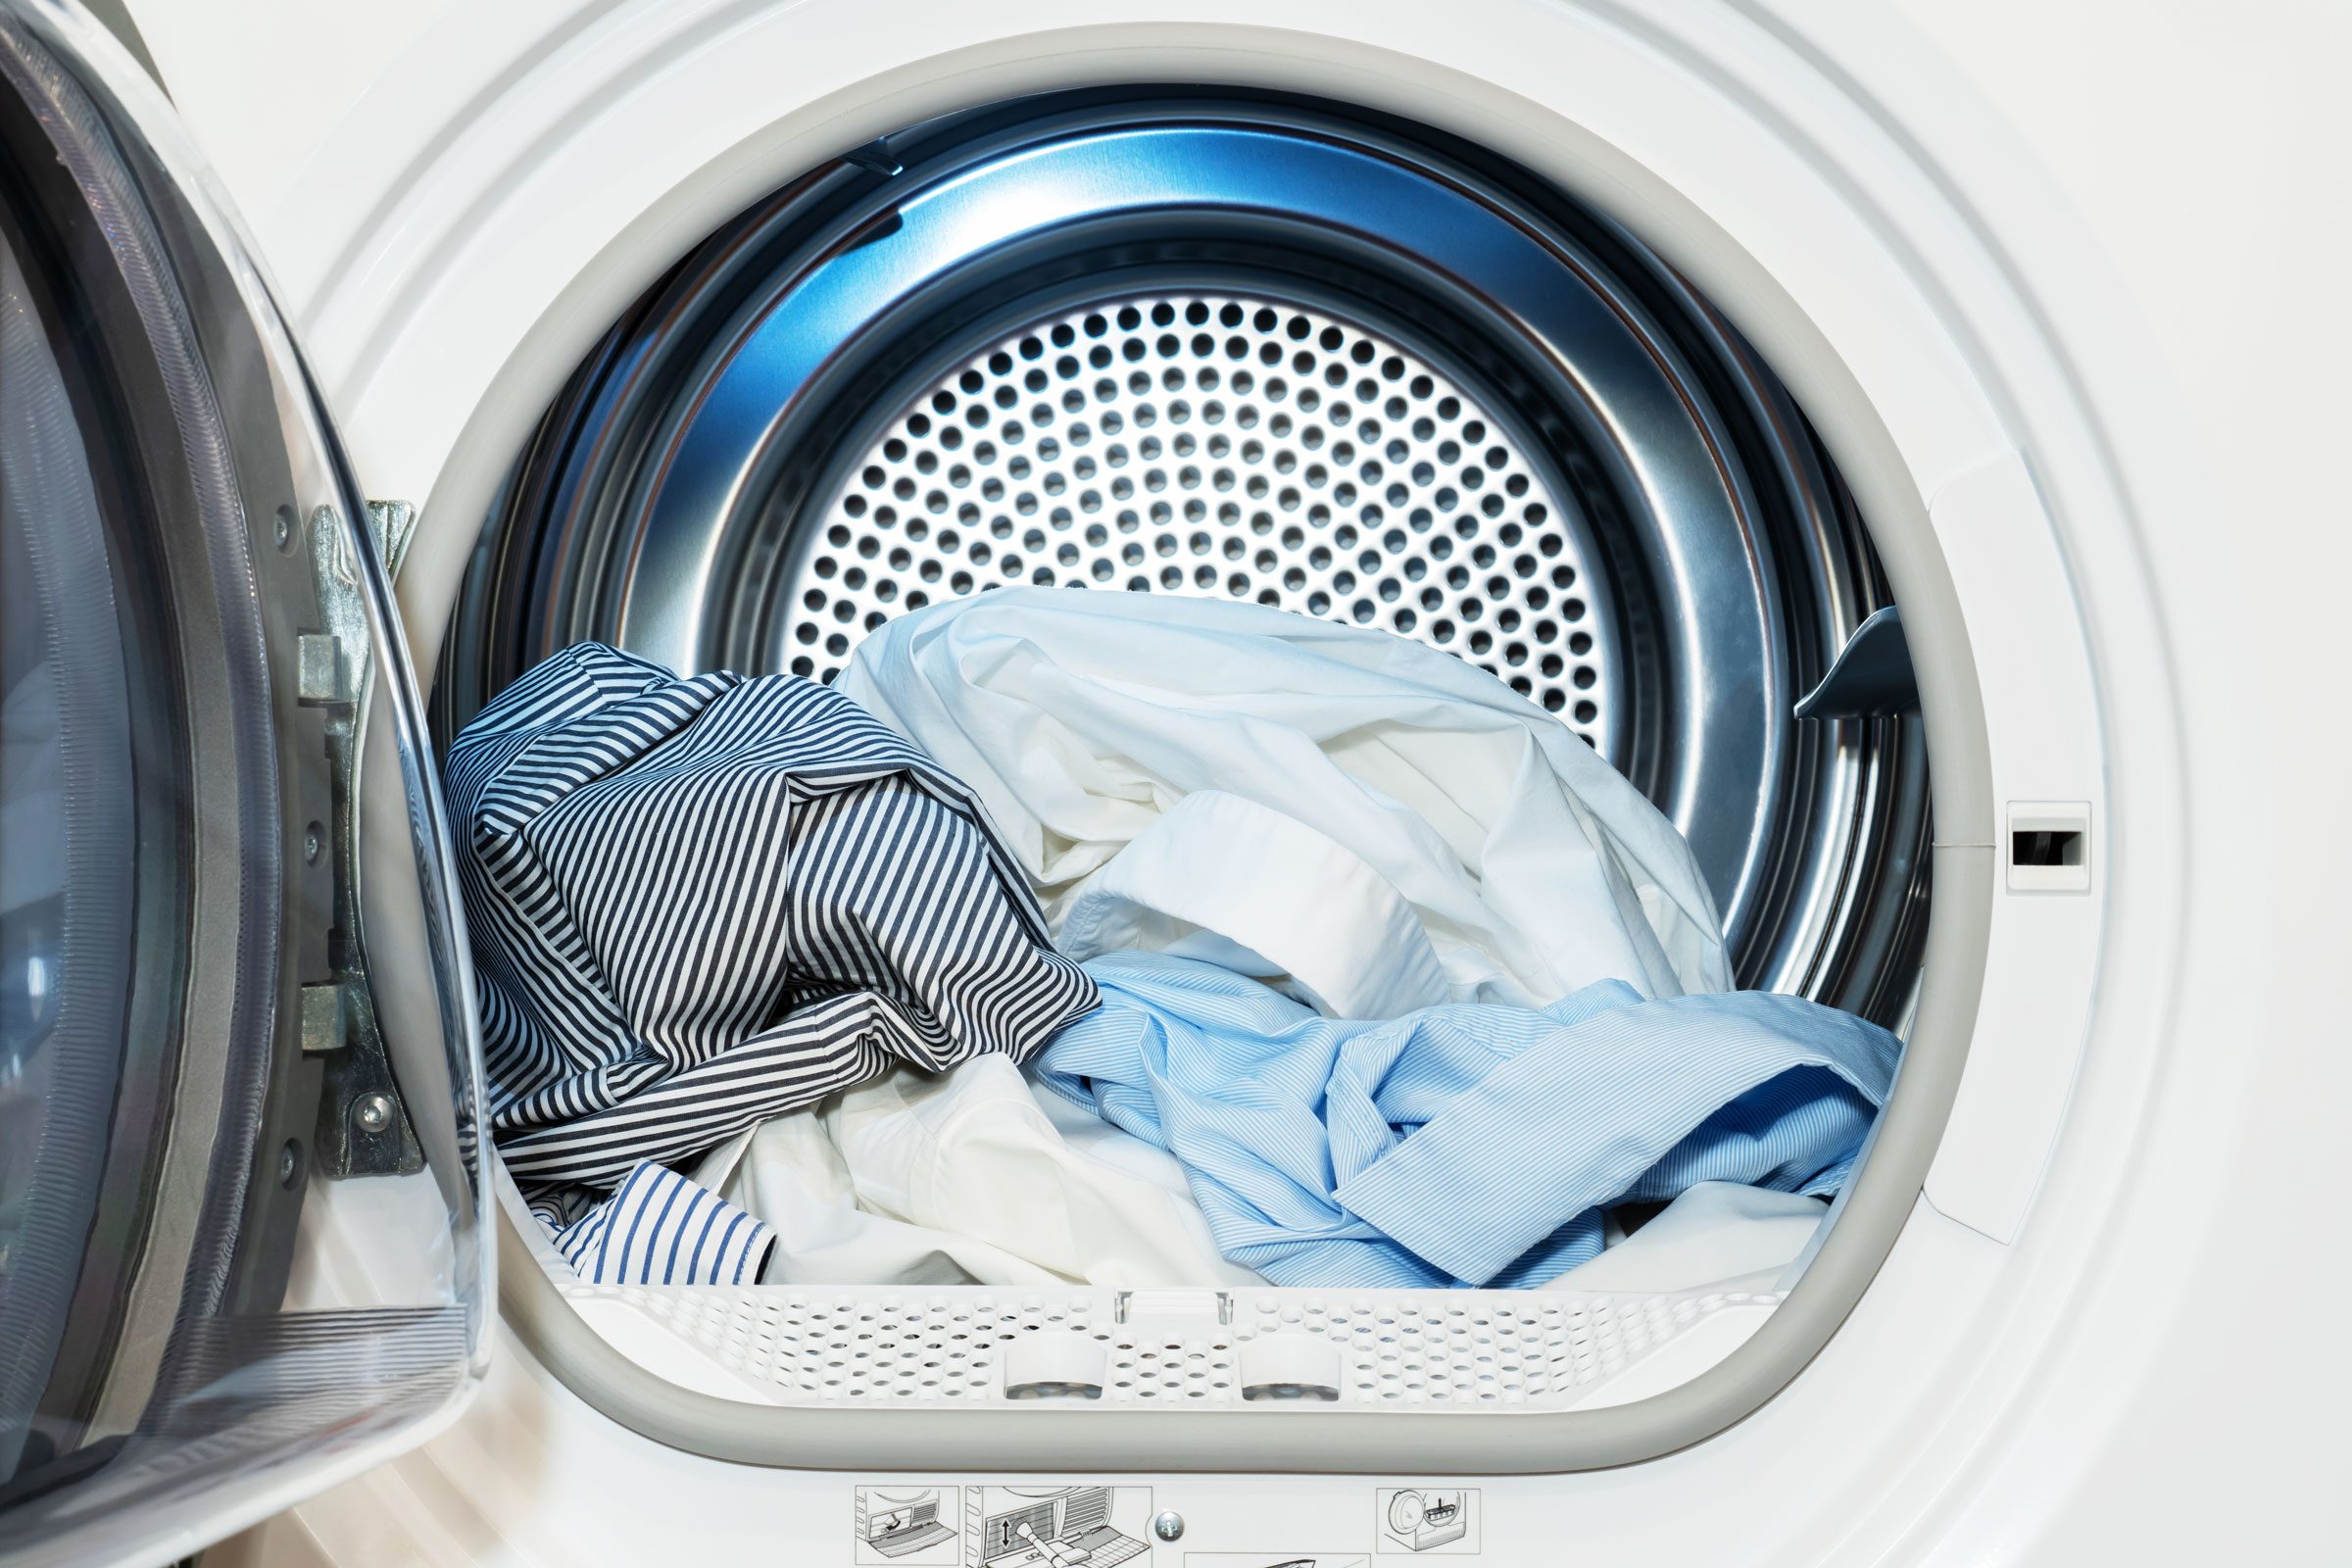 Air-dry or dryer: How to best dry your clothes - Reviewed